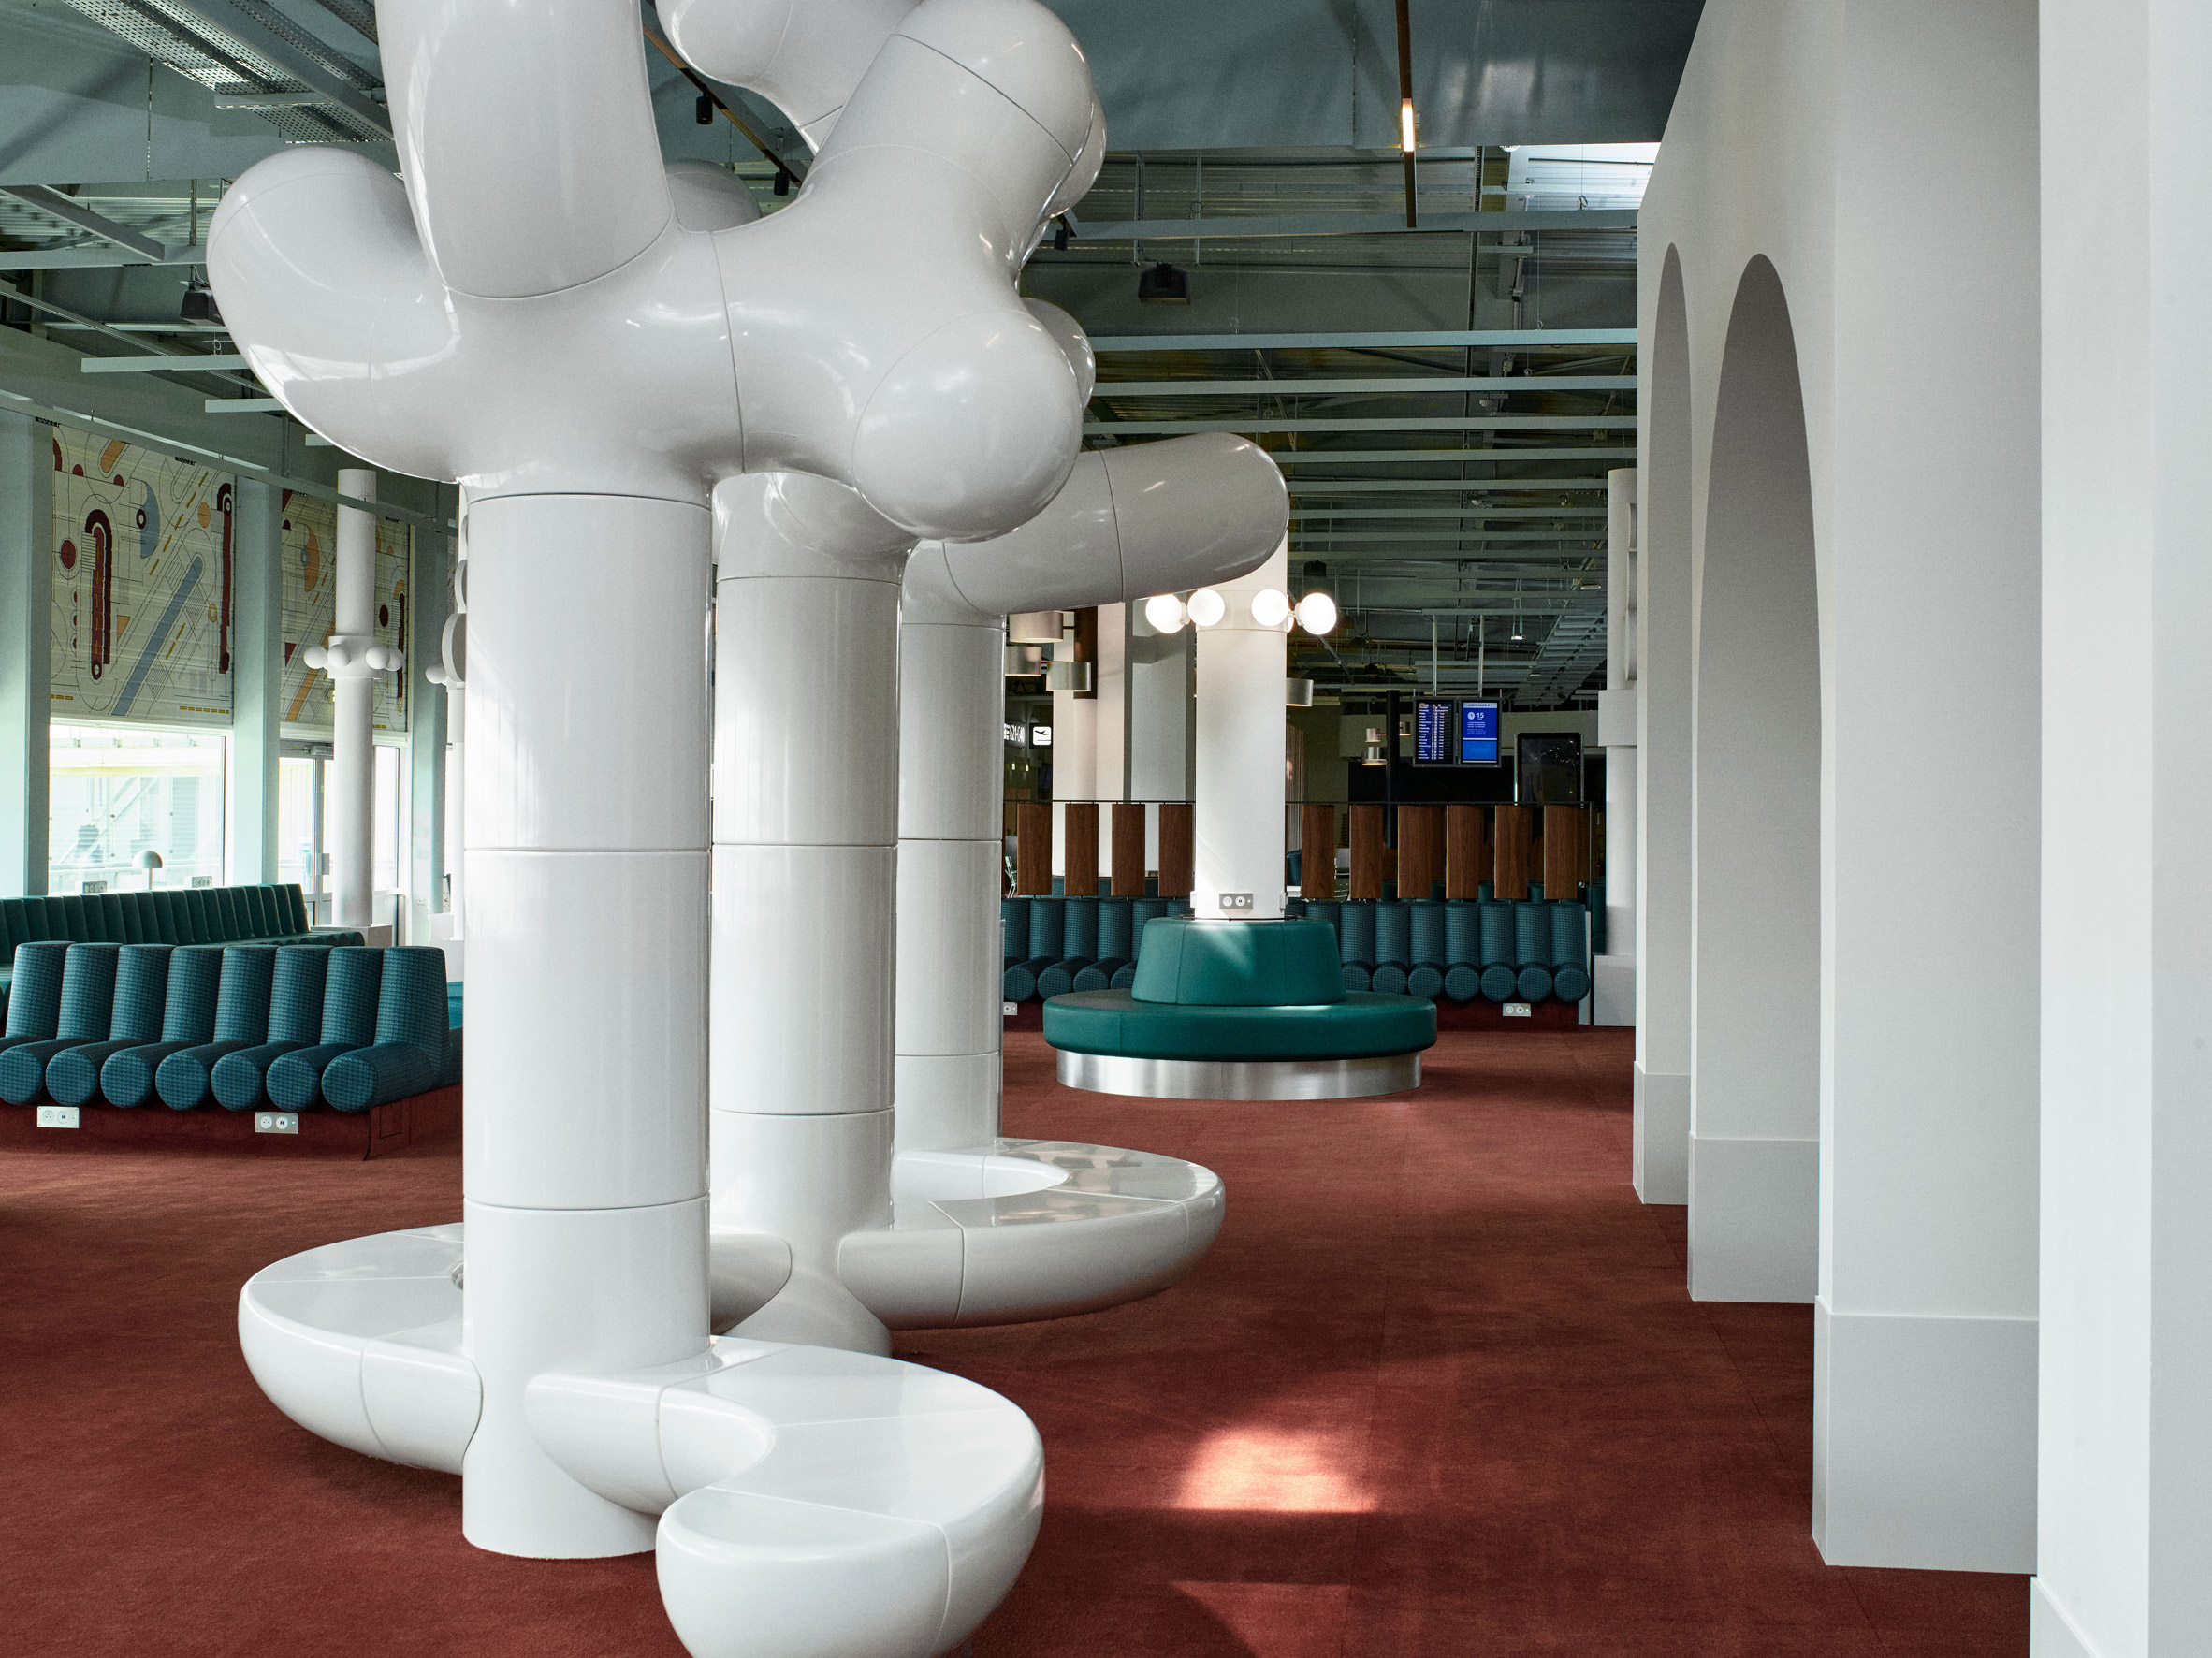 Photograph showing airport departure lounge with green bench seats and large tree-like rounded white sculptures